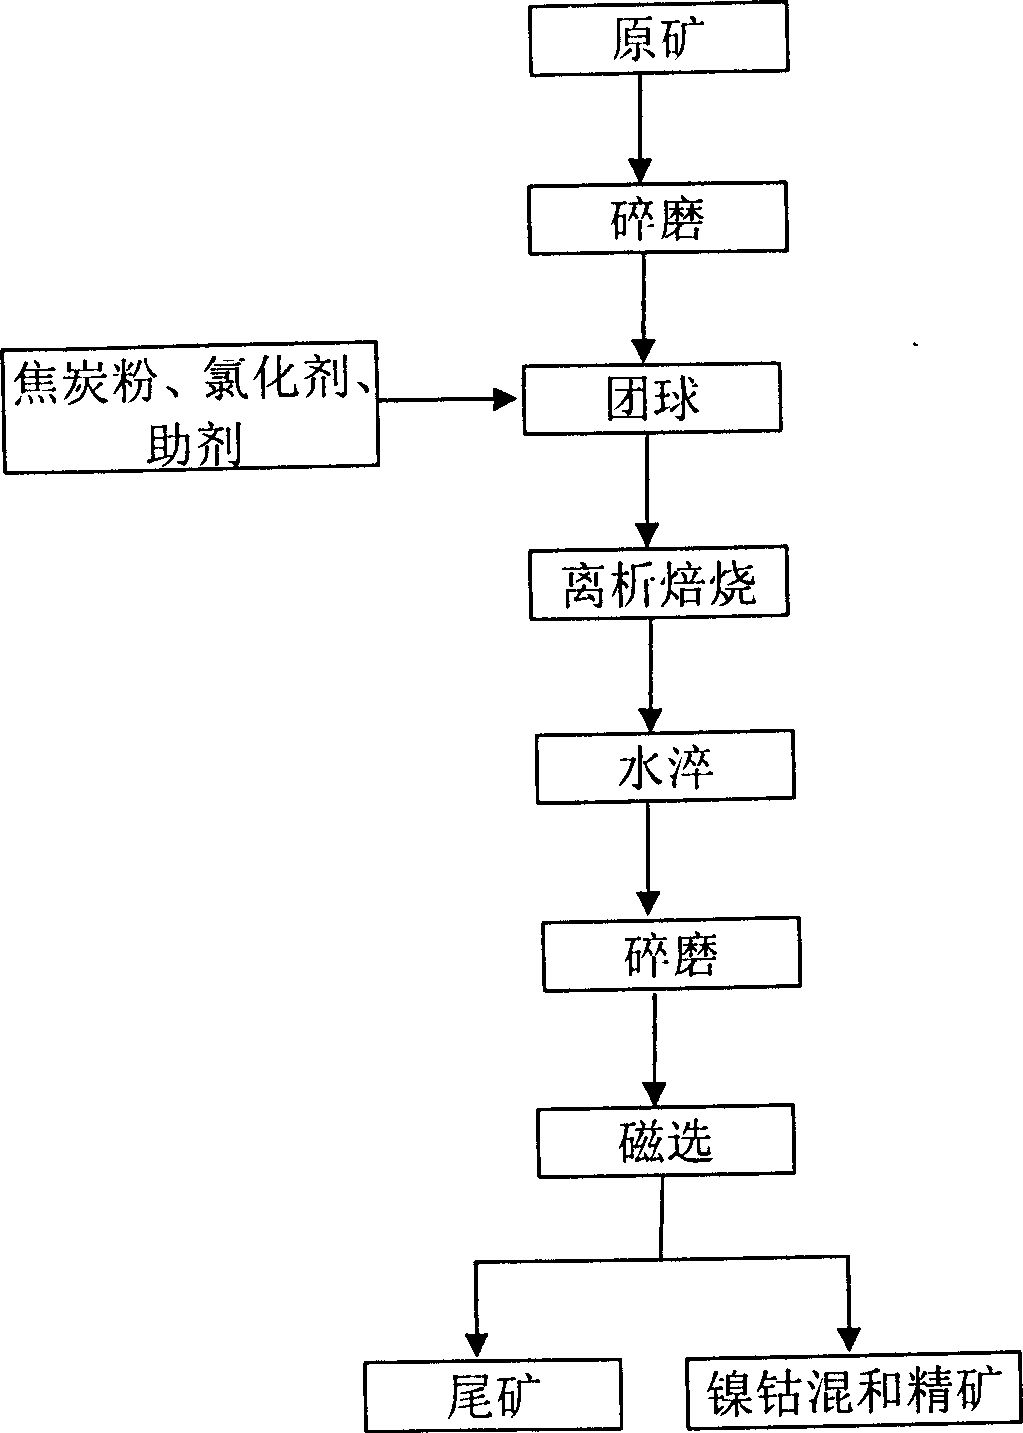 Method for recovering nickel and cobalt from nickel oxide ore and nickel silicide ore